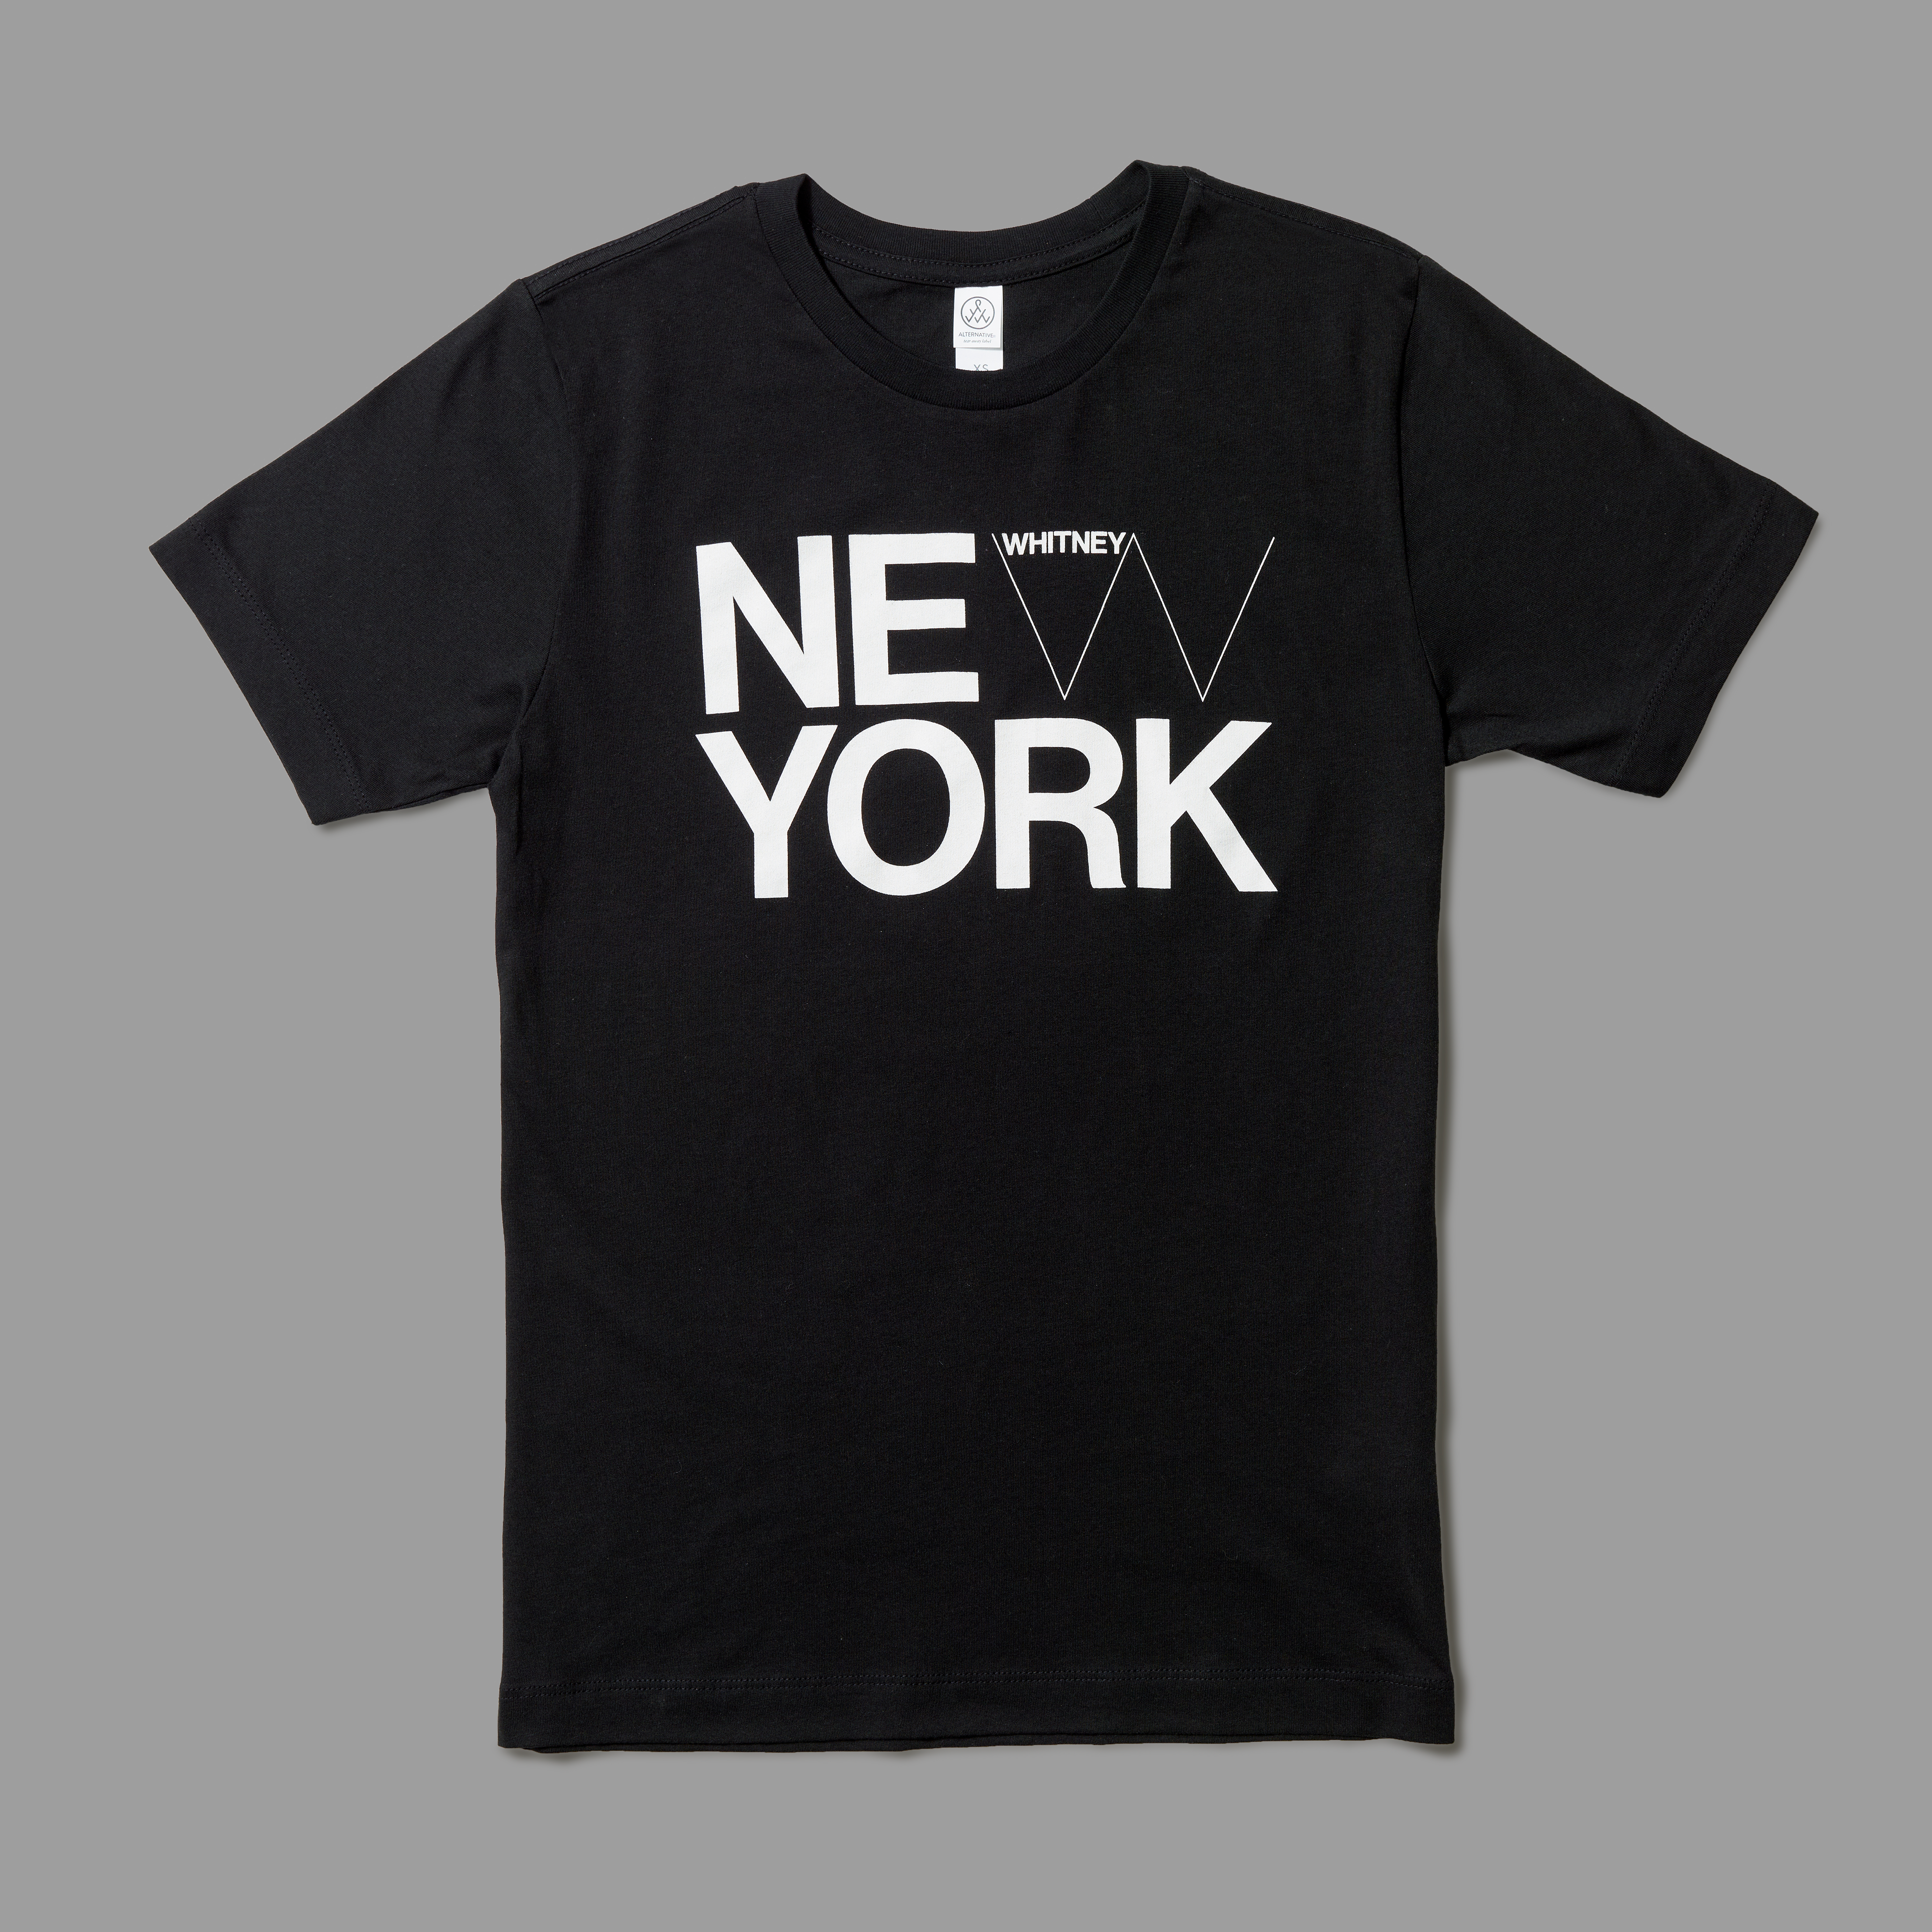 100% cotton black t-shirt with New York and the Whitney logo screen printed in white text